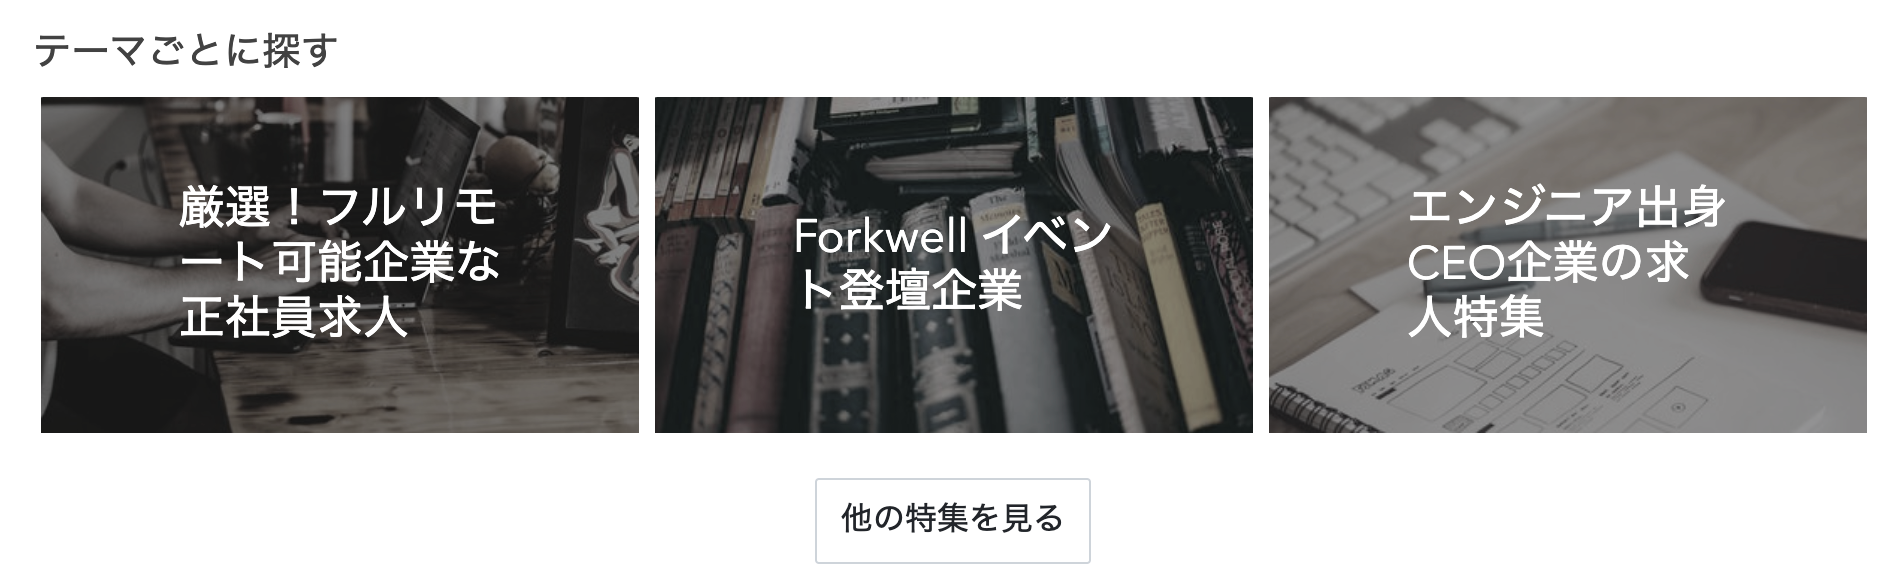 IT_Web__________________Forkwell_Jobs-5.png